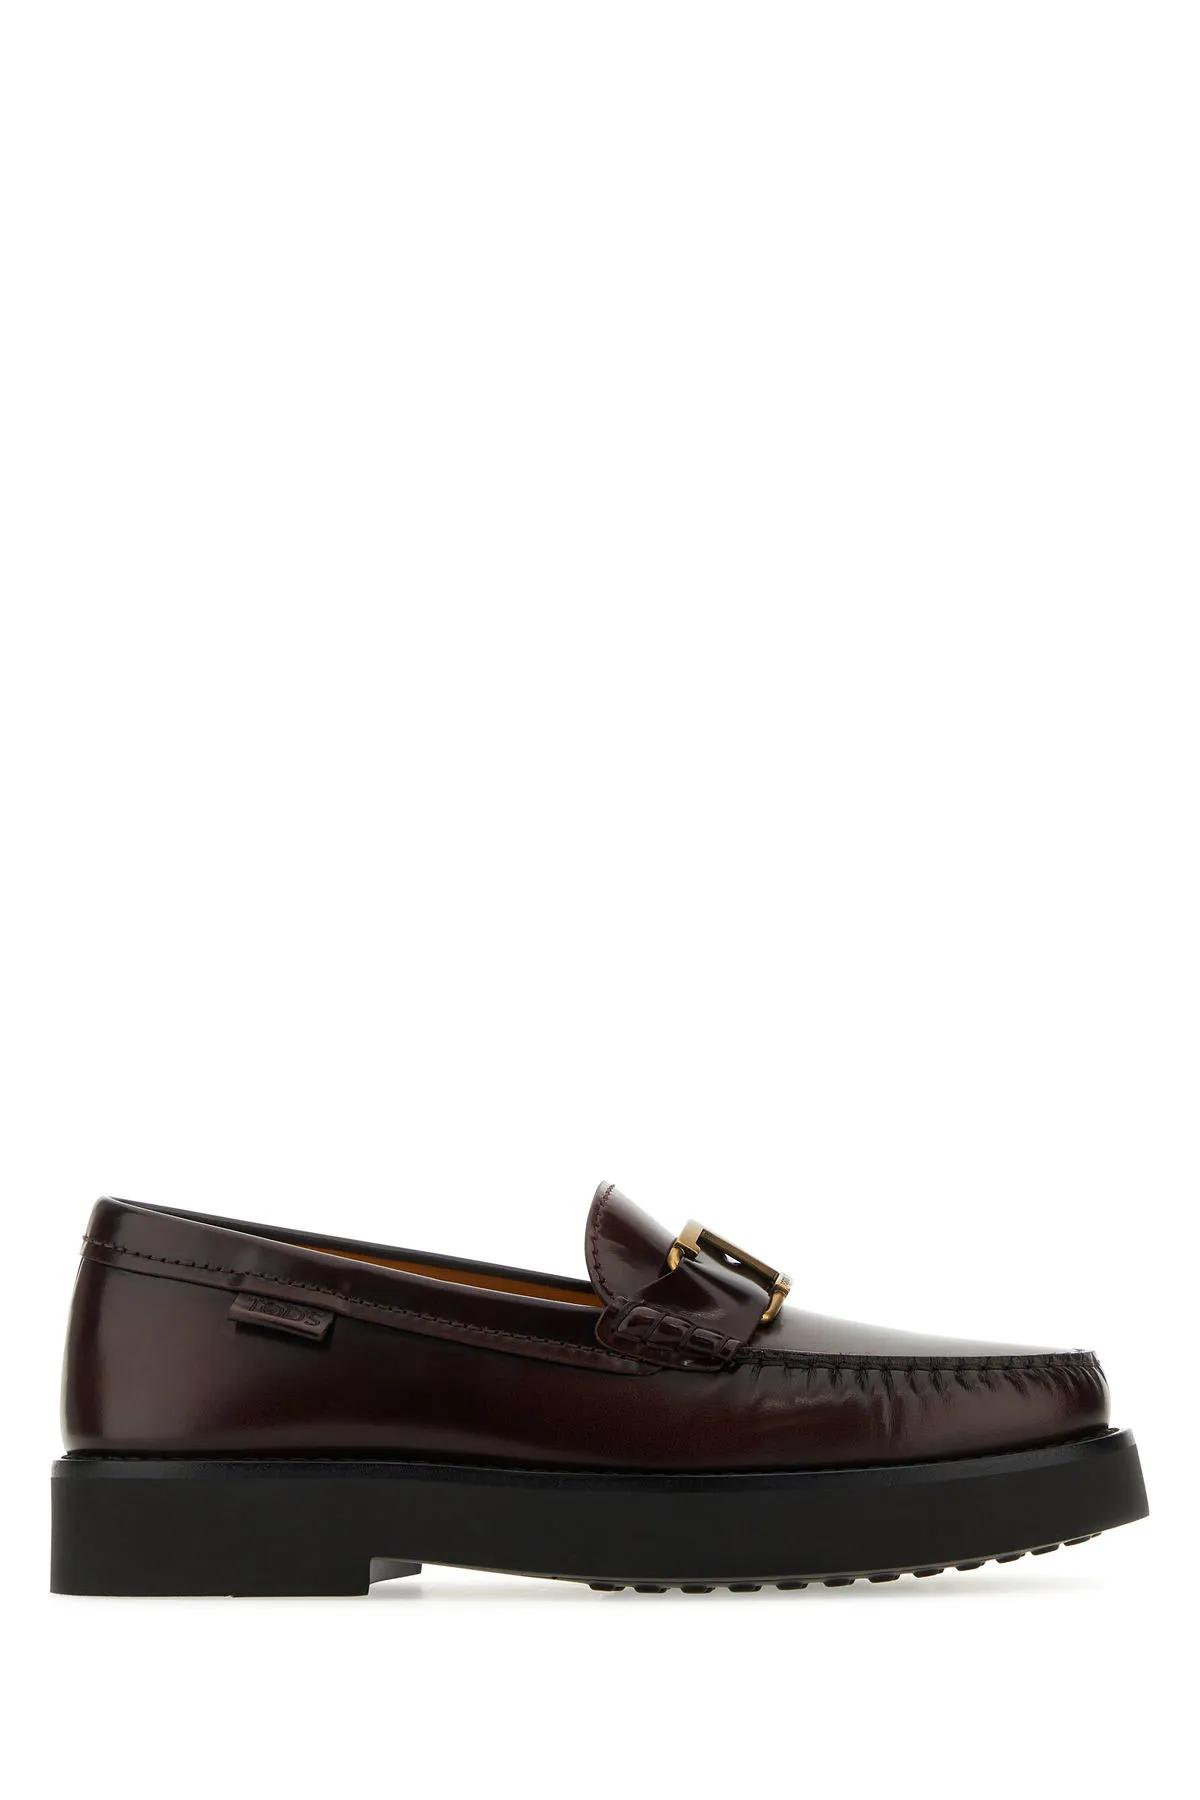 TOD'S GRAPE LEATHER LOAFERS